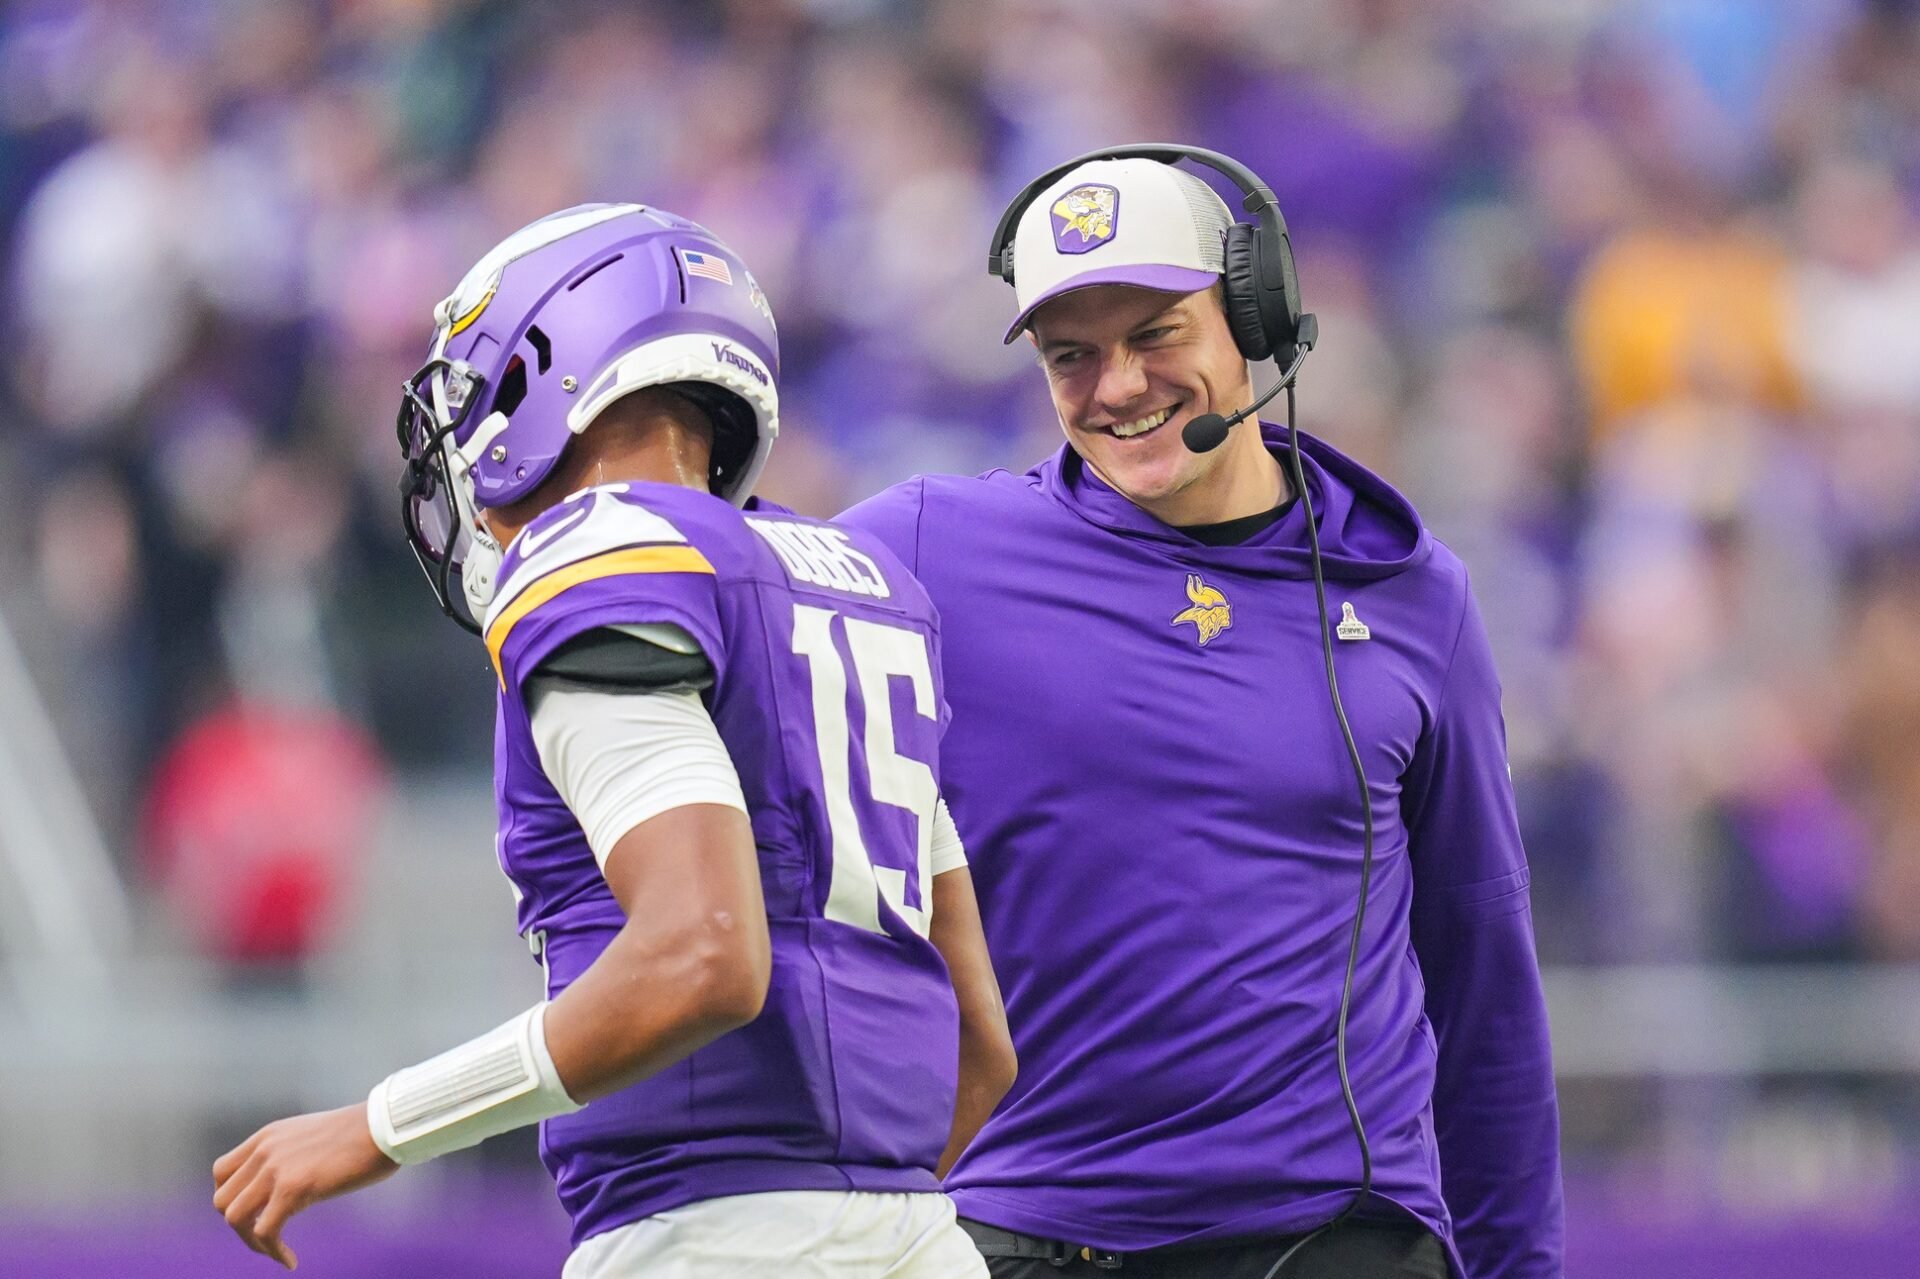 Minnesota Vikings head coach Kevin O'Connell celebrates with quarterback Joshua Dobbs (15) after a touchdown against the New Orleans Saints in the second quarter at U.S. Bank Stadium.